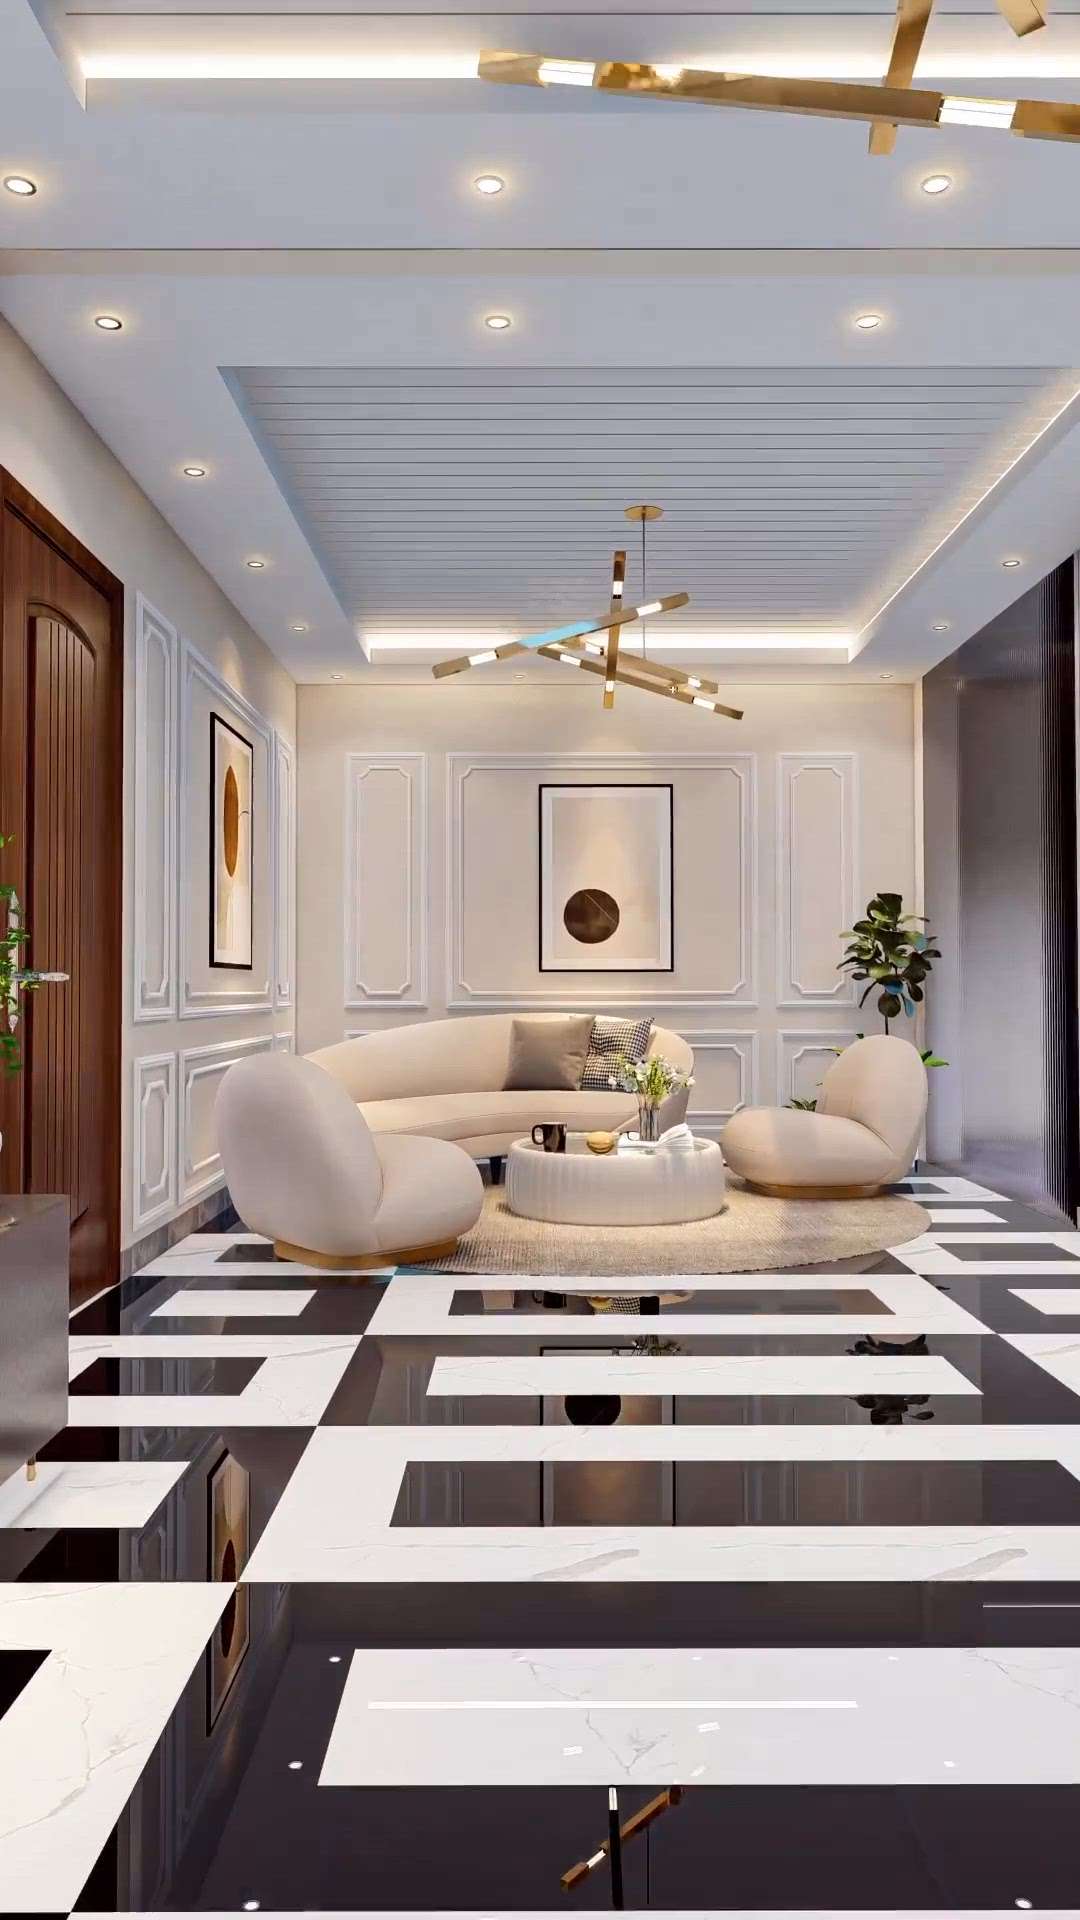 Book Your Interior Slot Today With Us
Ace Solution Helps To Provide You A Make Better Interior Solution 
-We Provide Pan India Services
-We Design | Home | Offices | Cafe | Restro
-2D And 3D Plans
-Comment Down Which One Is your Favourite.
-Like, Share With Your Friends.
-Dm For Reasonable Rates.
-For Construction And Home Designs.
-We Do Vastu Work Also.
.
.
#InteriorDesigner #LivingroomDesigns #HomeDecor #digitalart #interiorpainting #mandir